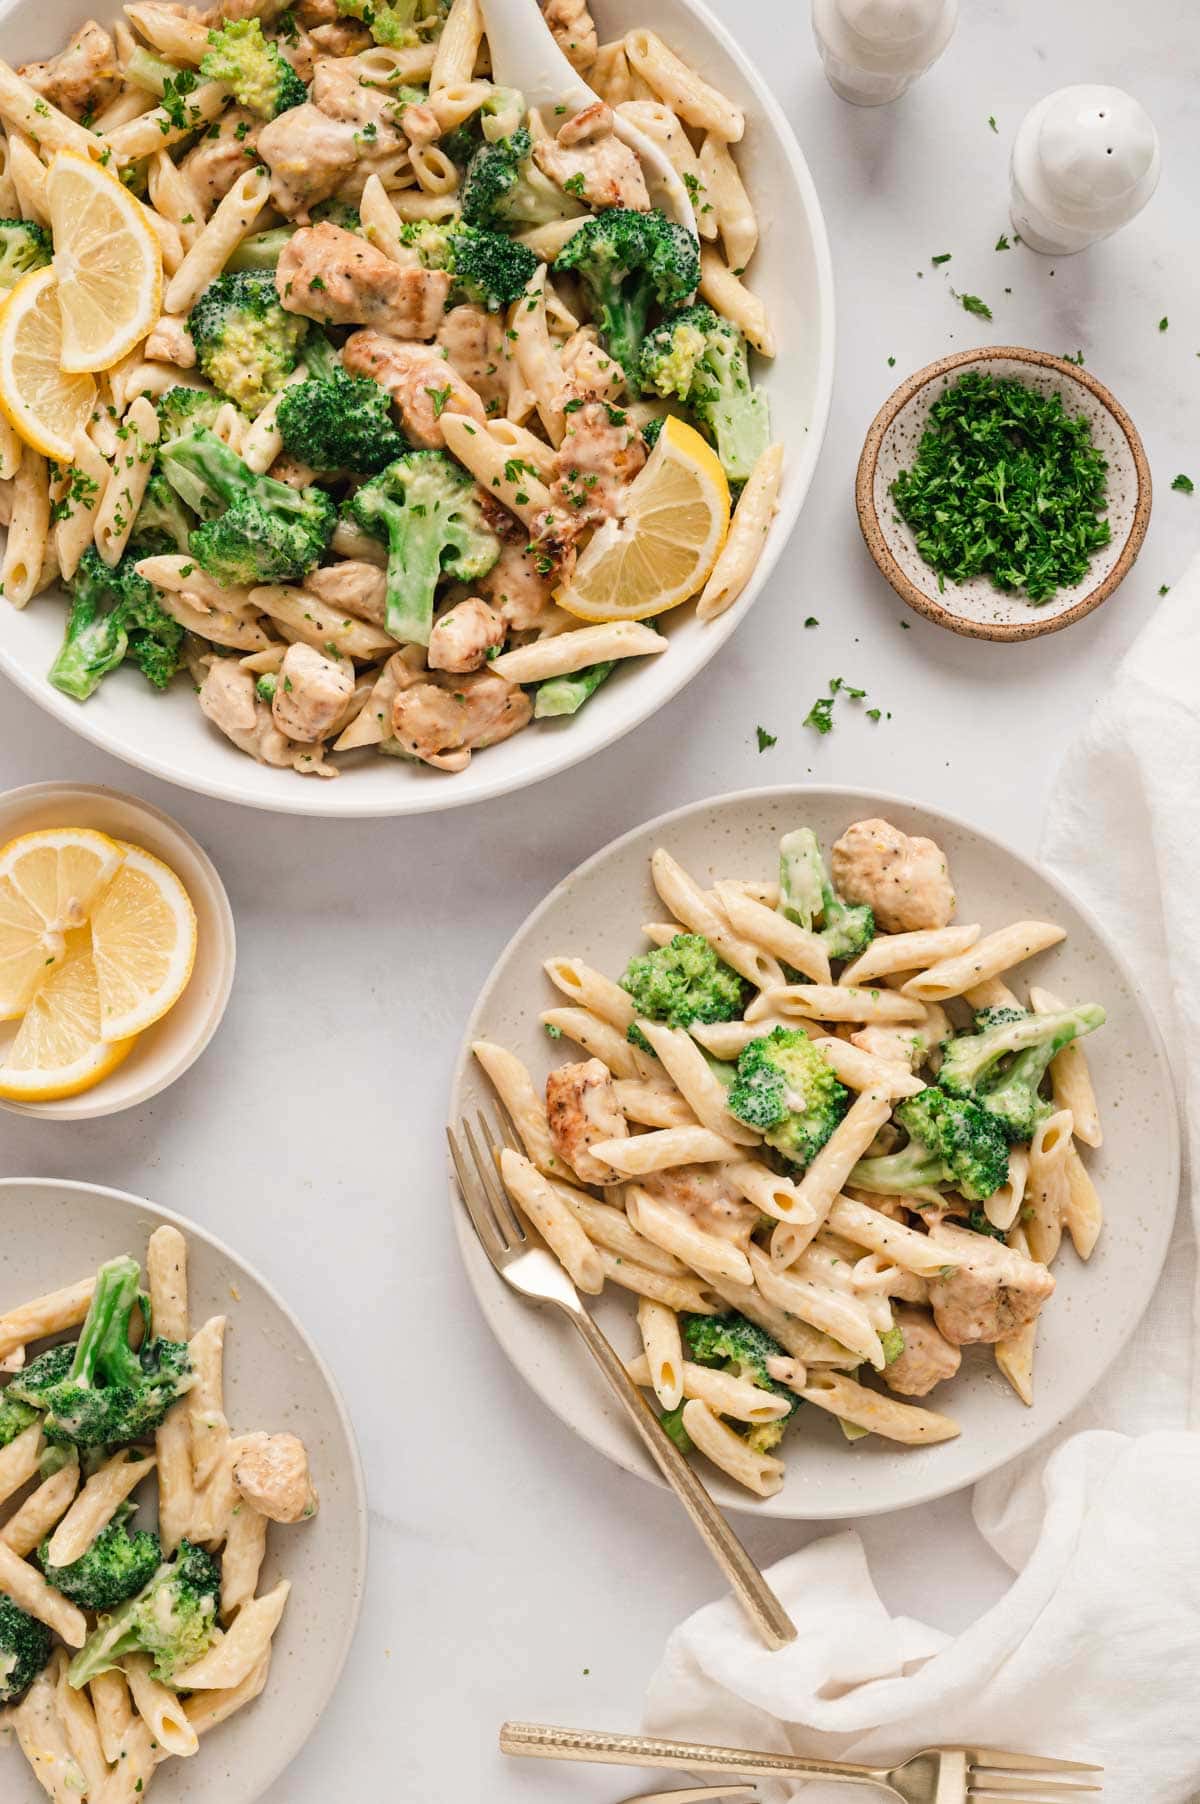 Chicken broccoli and pasta on individual plates.